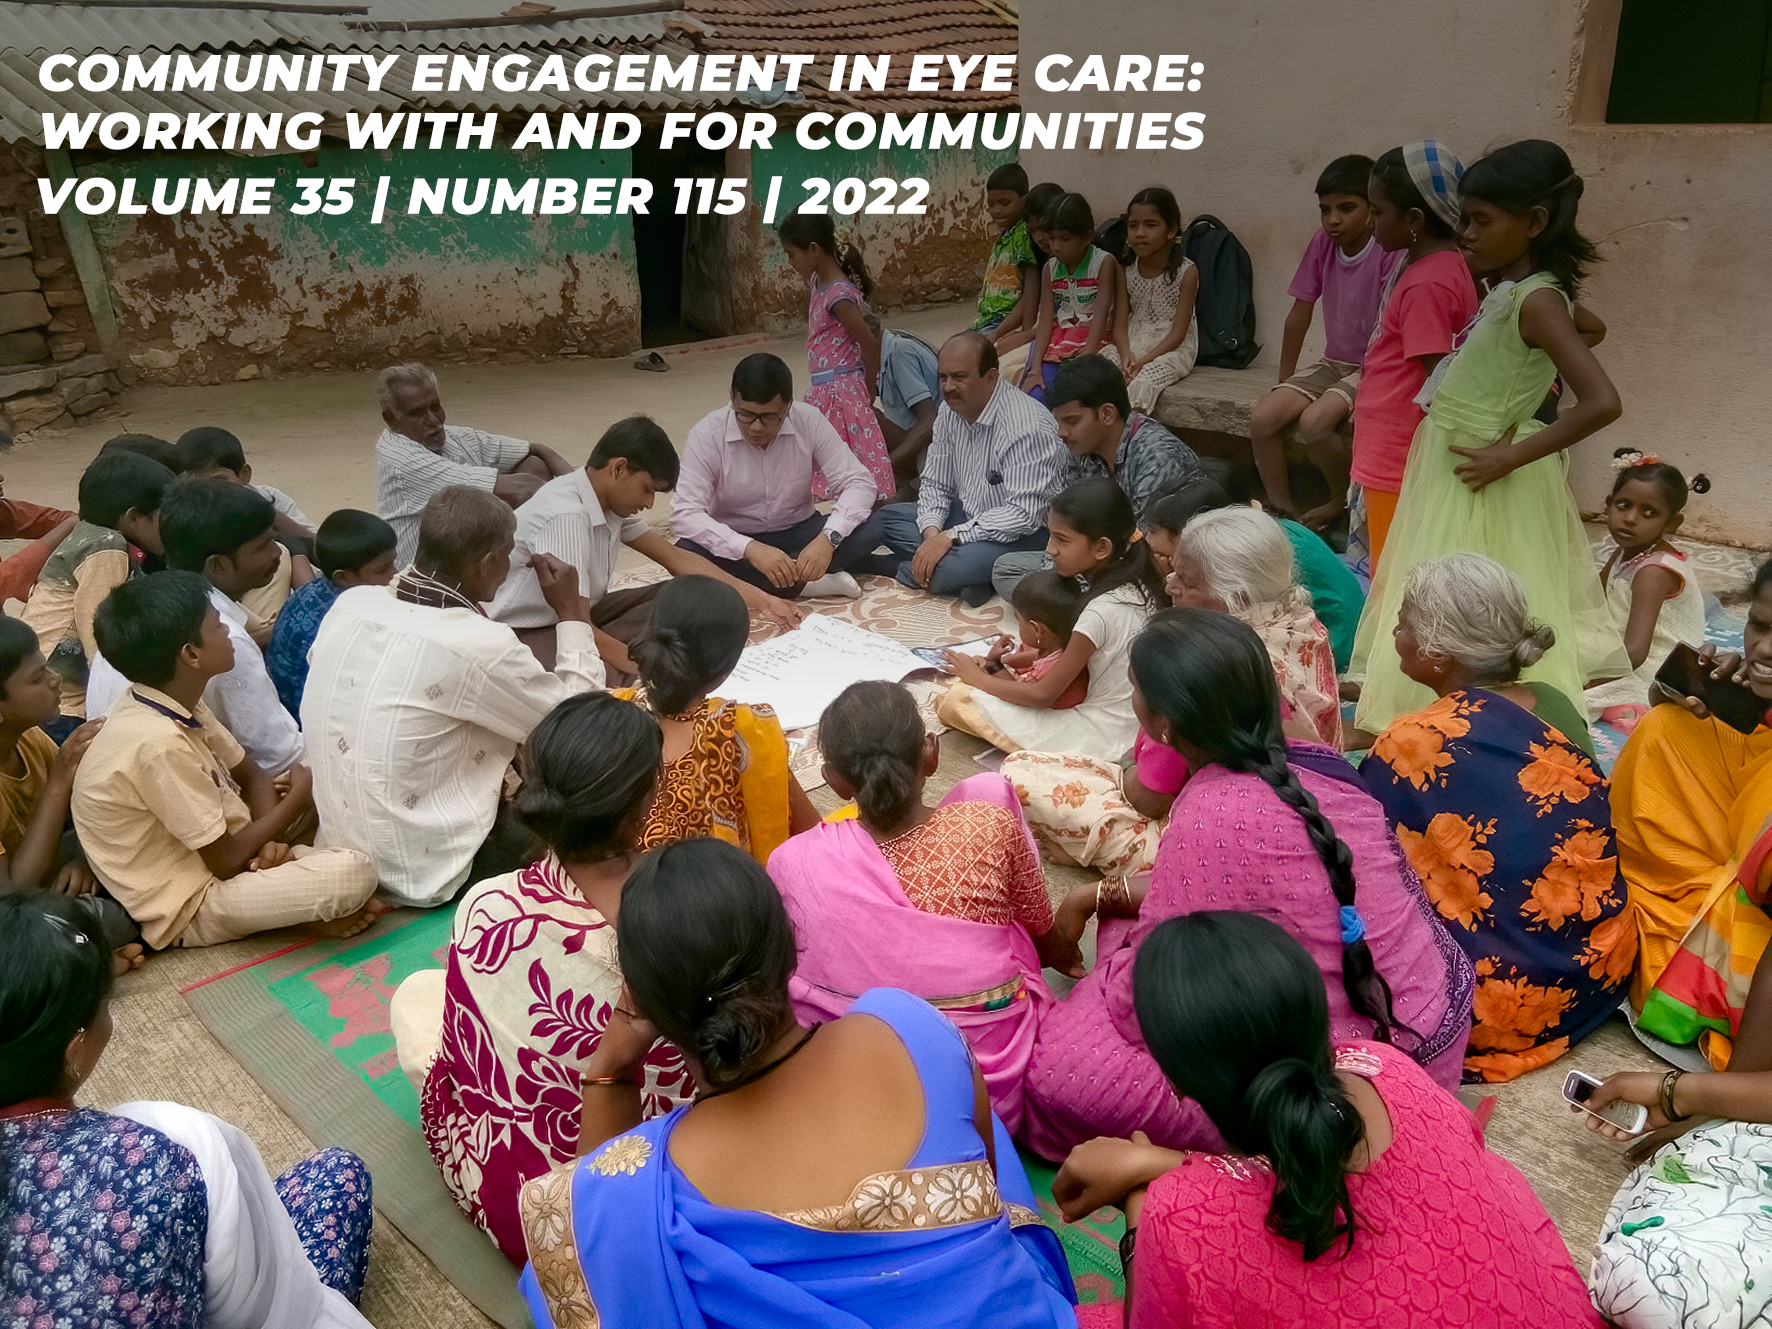 Community engagement in eye care: working with and for communities